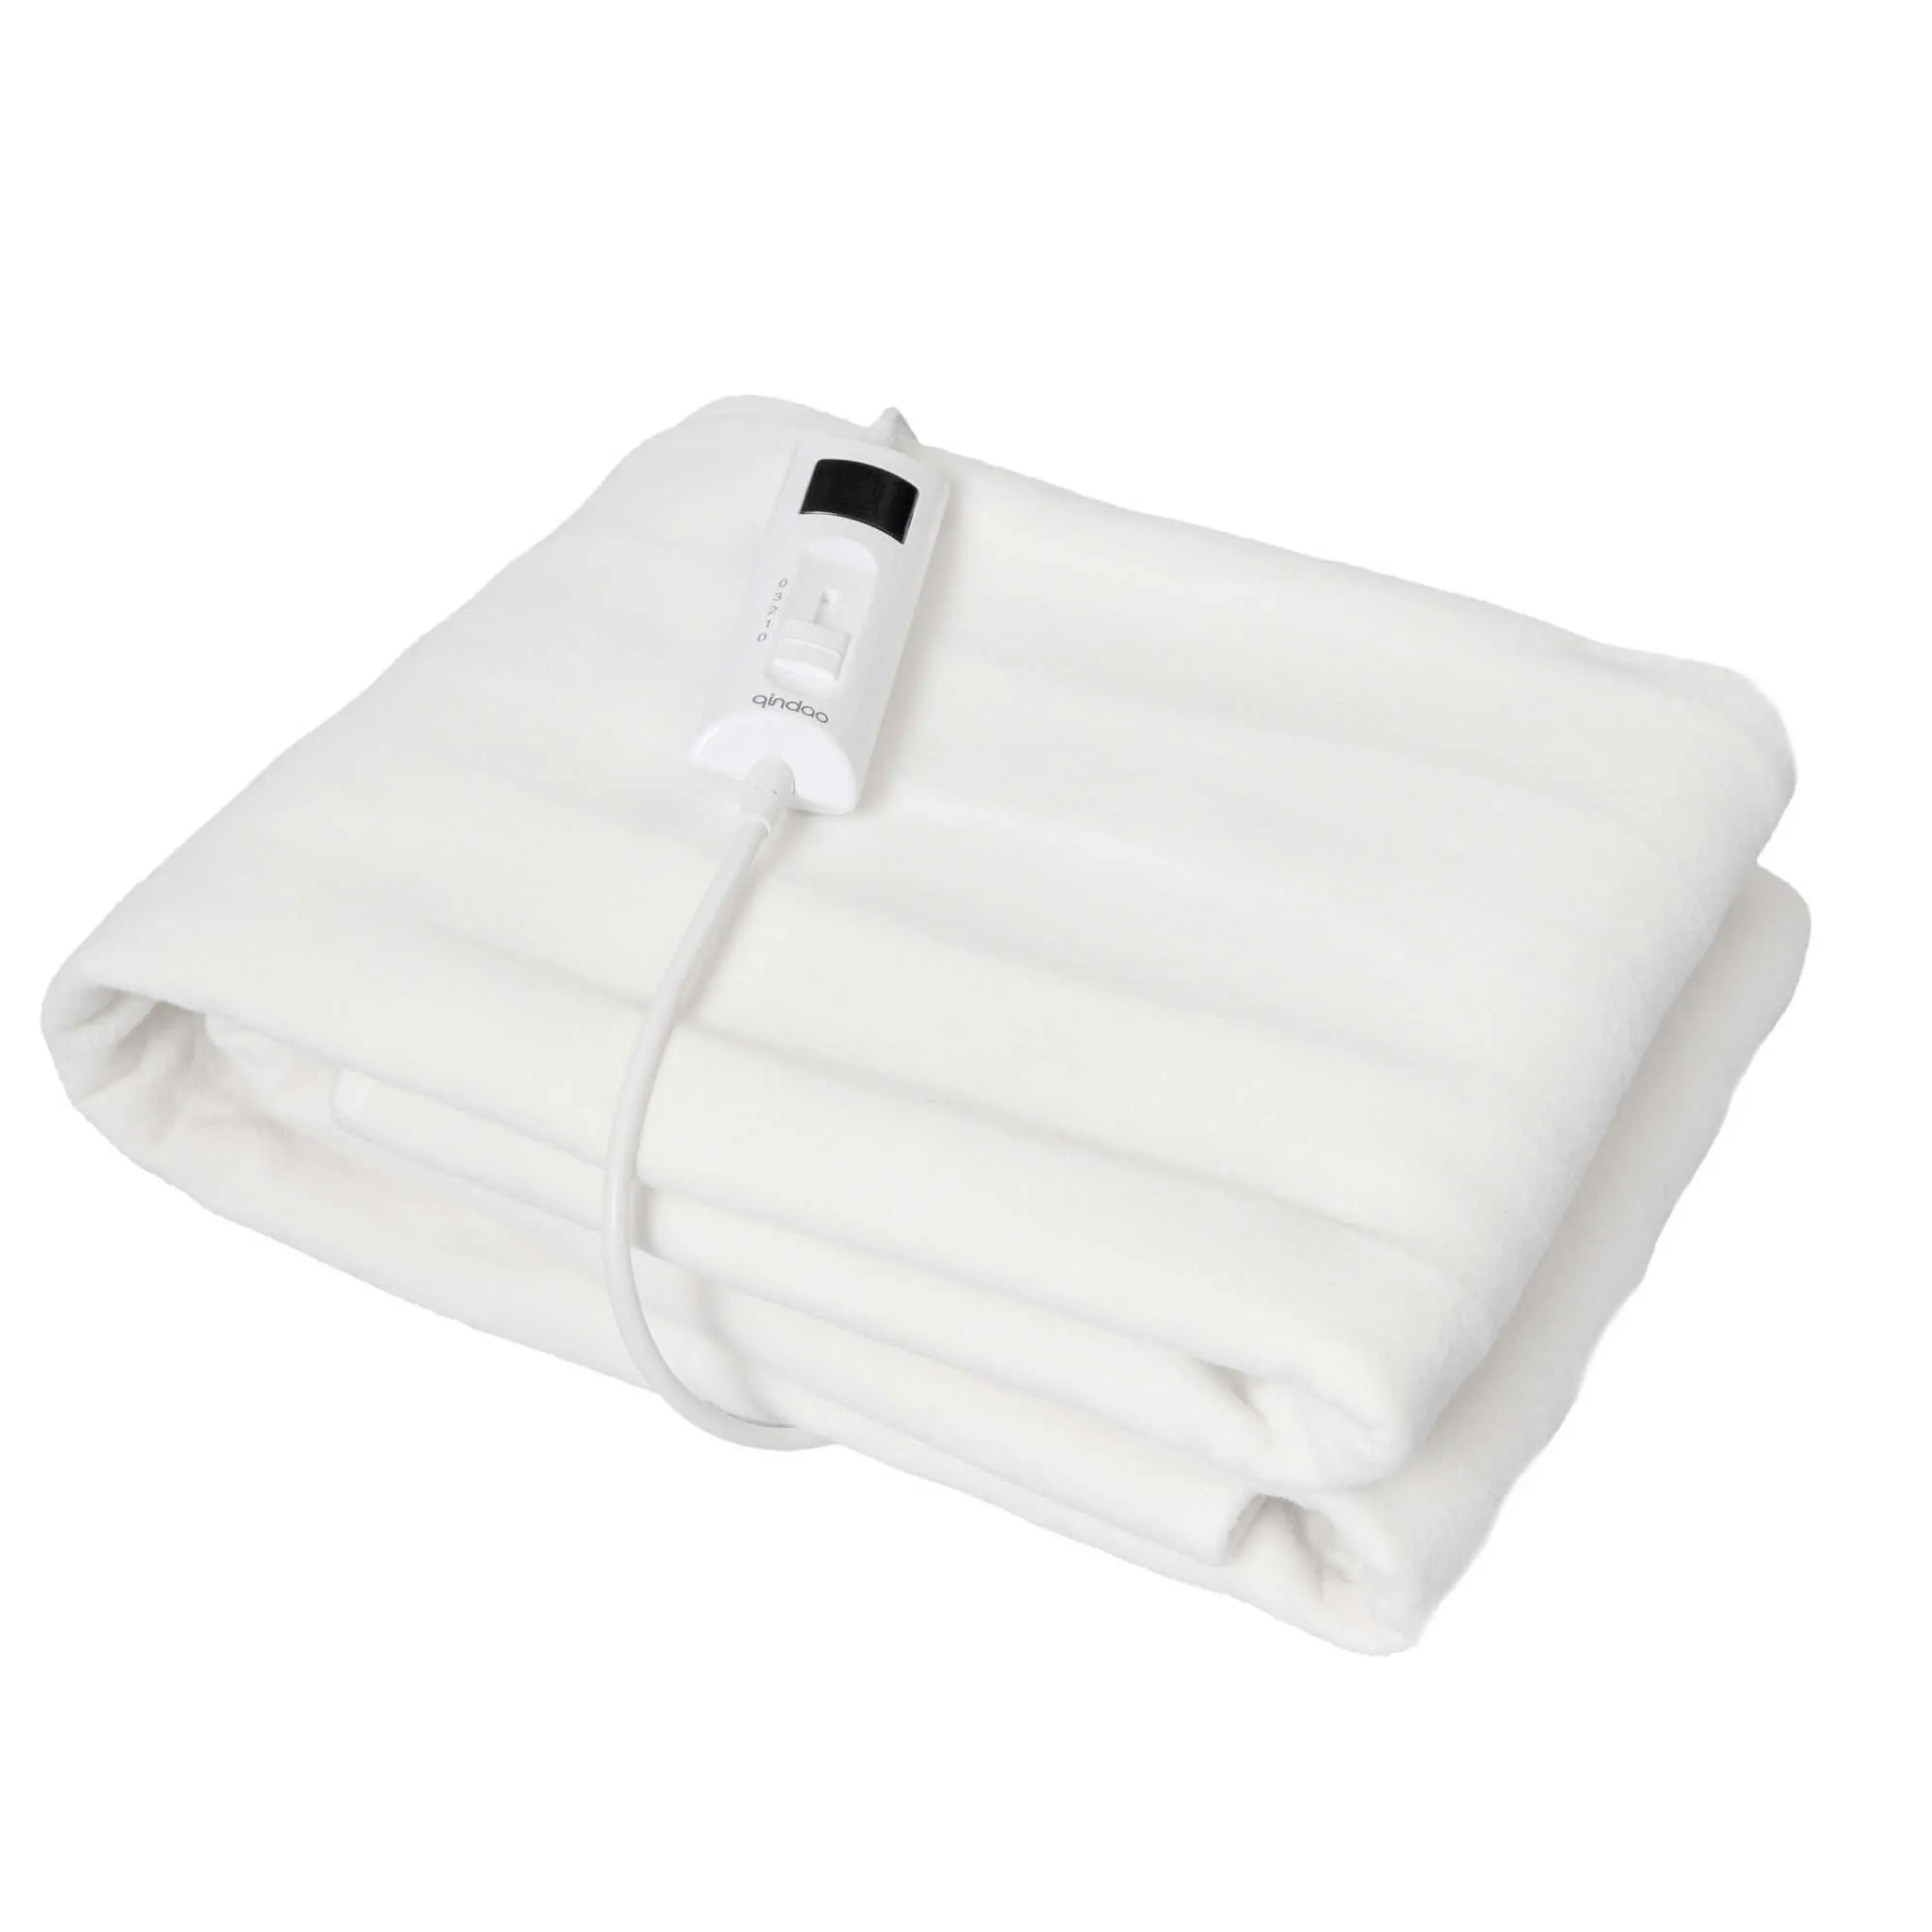 heating blanket rapid heating electric blanket with 10 setting controller for eu maket 220240v